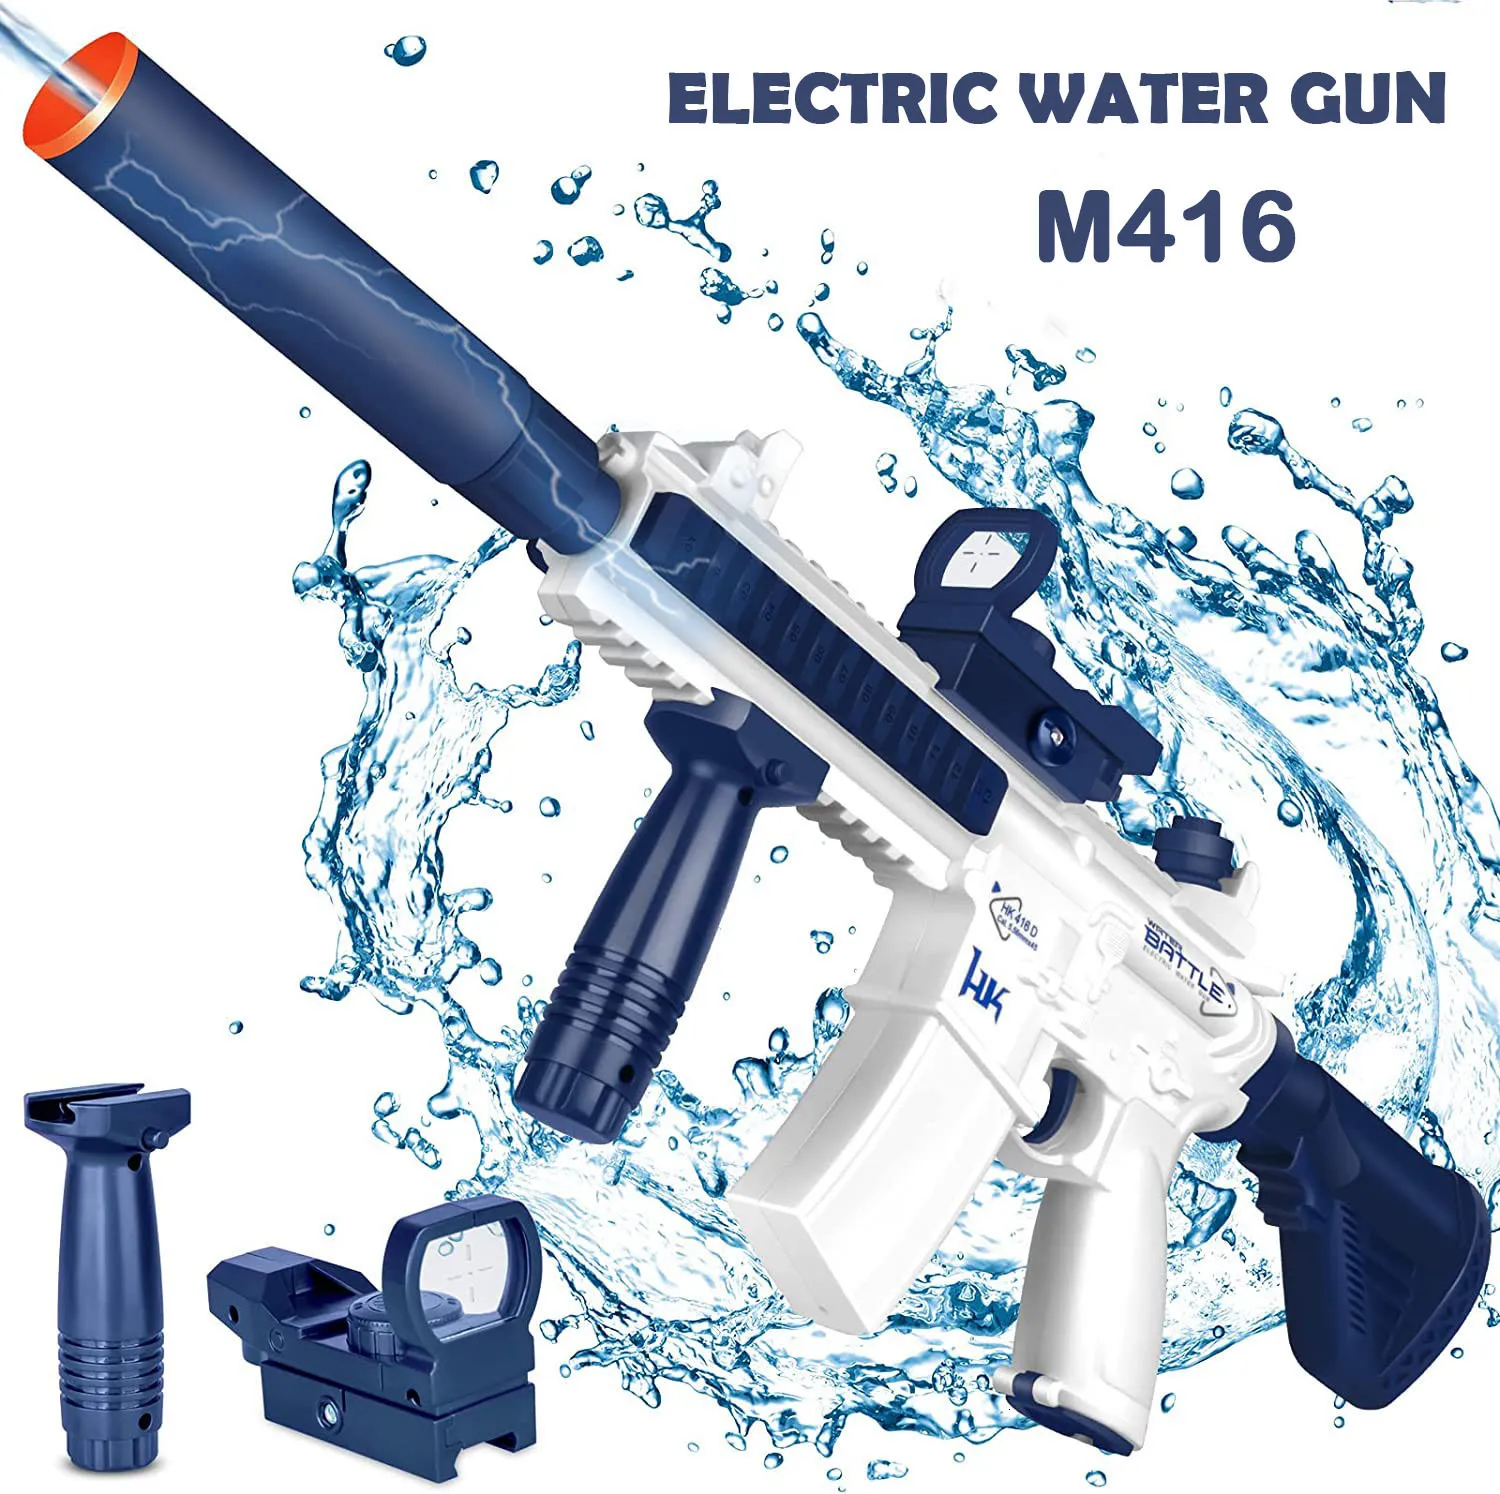 Sand Play Water Fun Gun Electric Toy M416 Super Automatic Guns Glock Swimming Pool Beach Party Game Outdoor Fighting for Kids Gift 230617